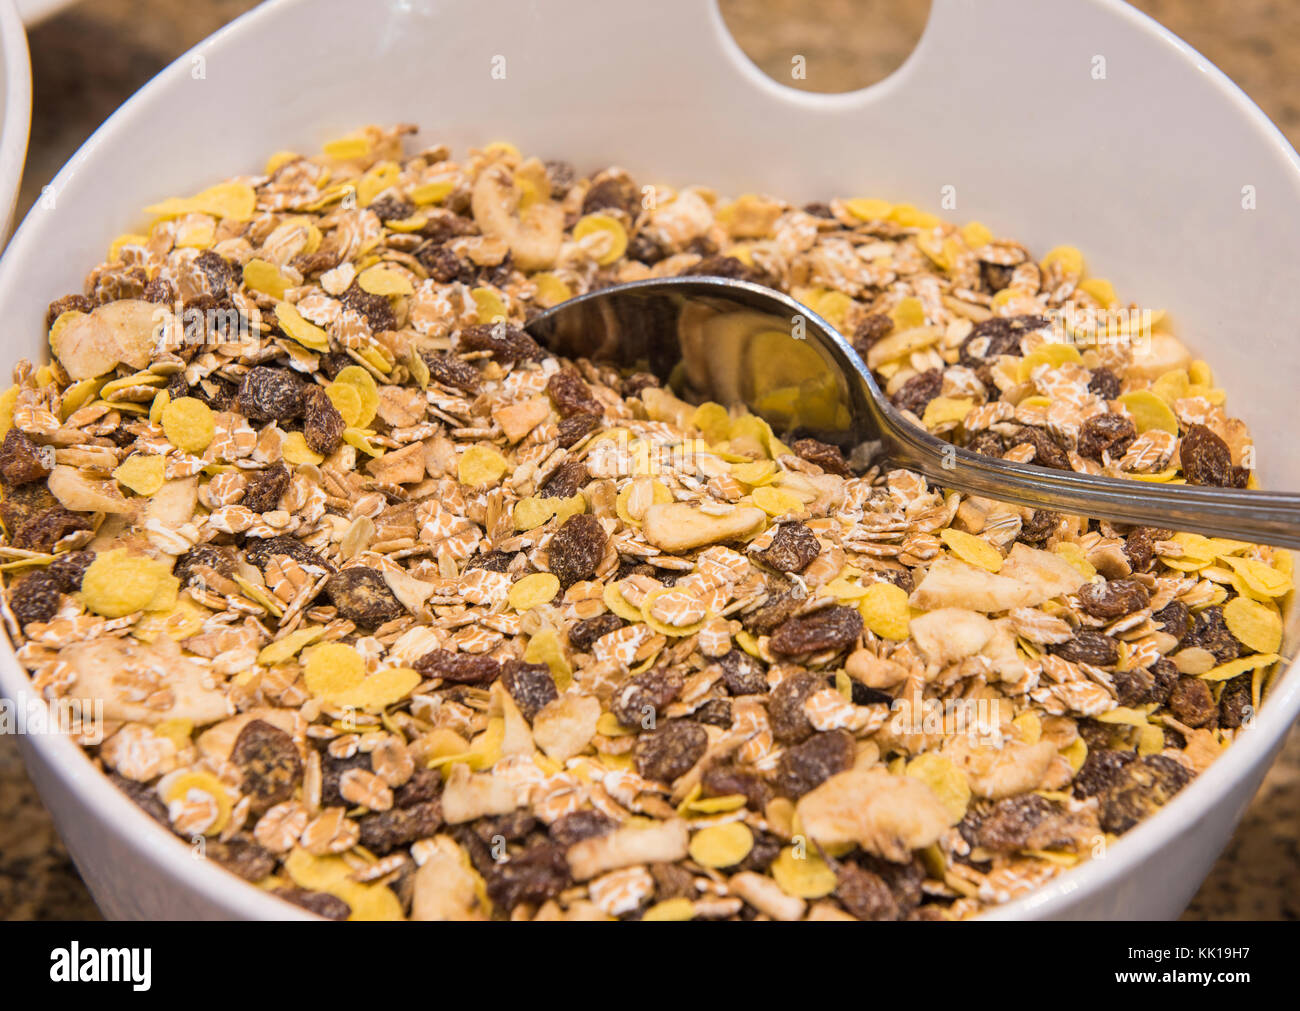 Selection display bowl of museli breakfast cereal food at a luxury restaurant buffet bar area Stock Photo